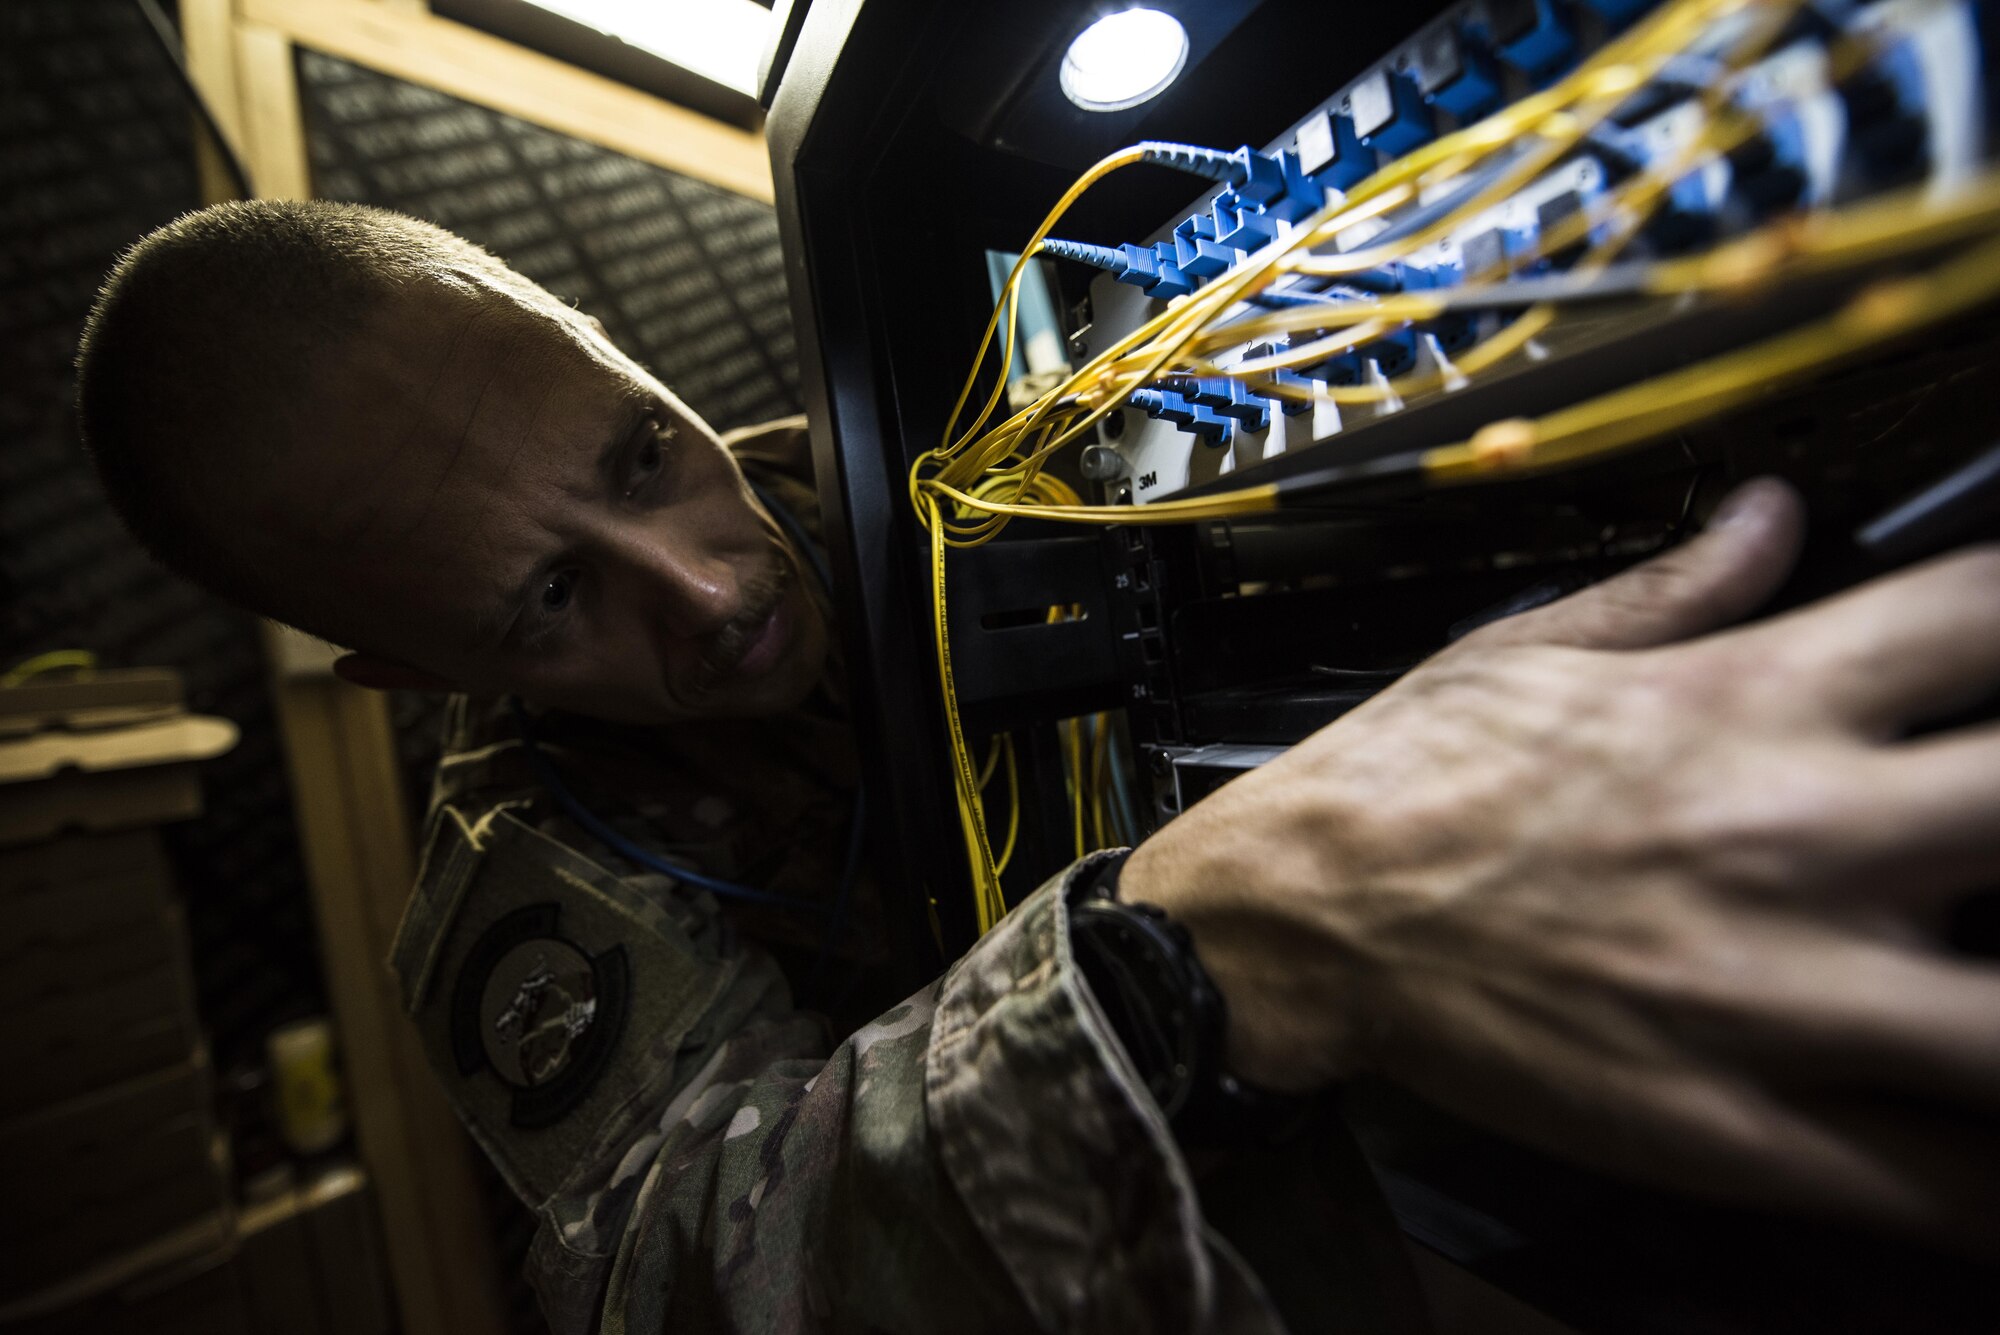 SMSgt Brandon McCoy, 332nd Expeditionary Communications Squadron Superintendent, checks the installation of new wireless internet firewall equipment Nov. 13, 2017, in Southwest Asia. The firewall improvements will ensure a safe, reliable connection to the web for deployed service members. (U.S. Air Force by Senior Airman Joshua Kleinholz)